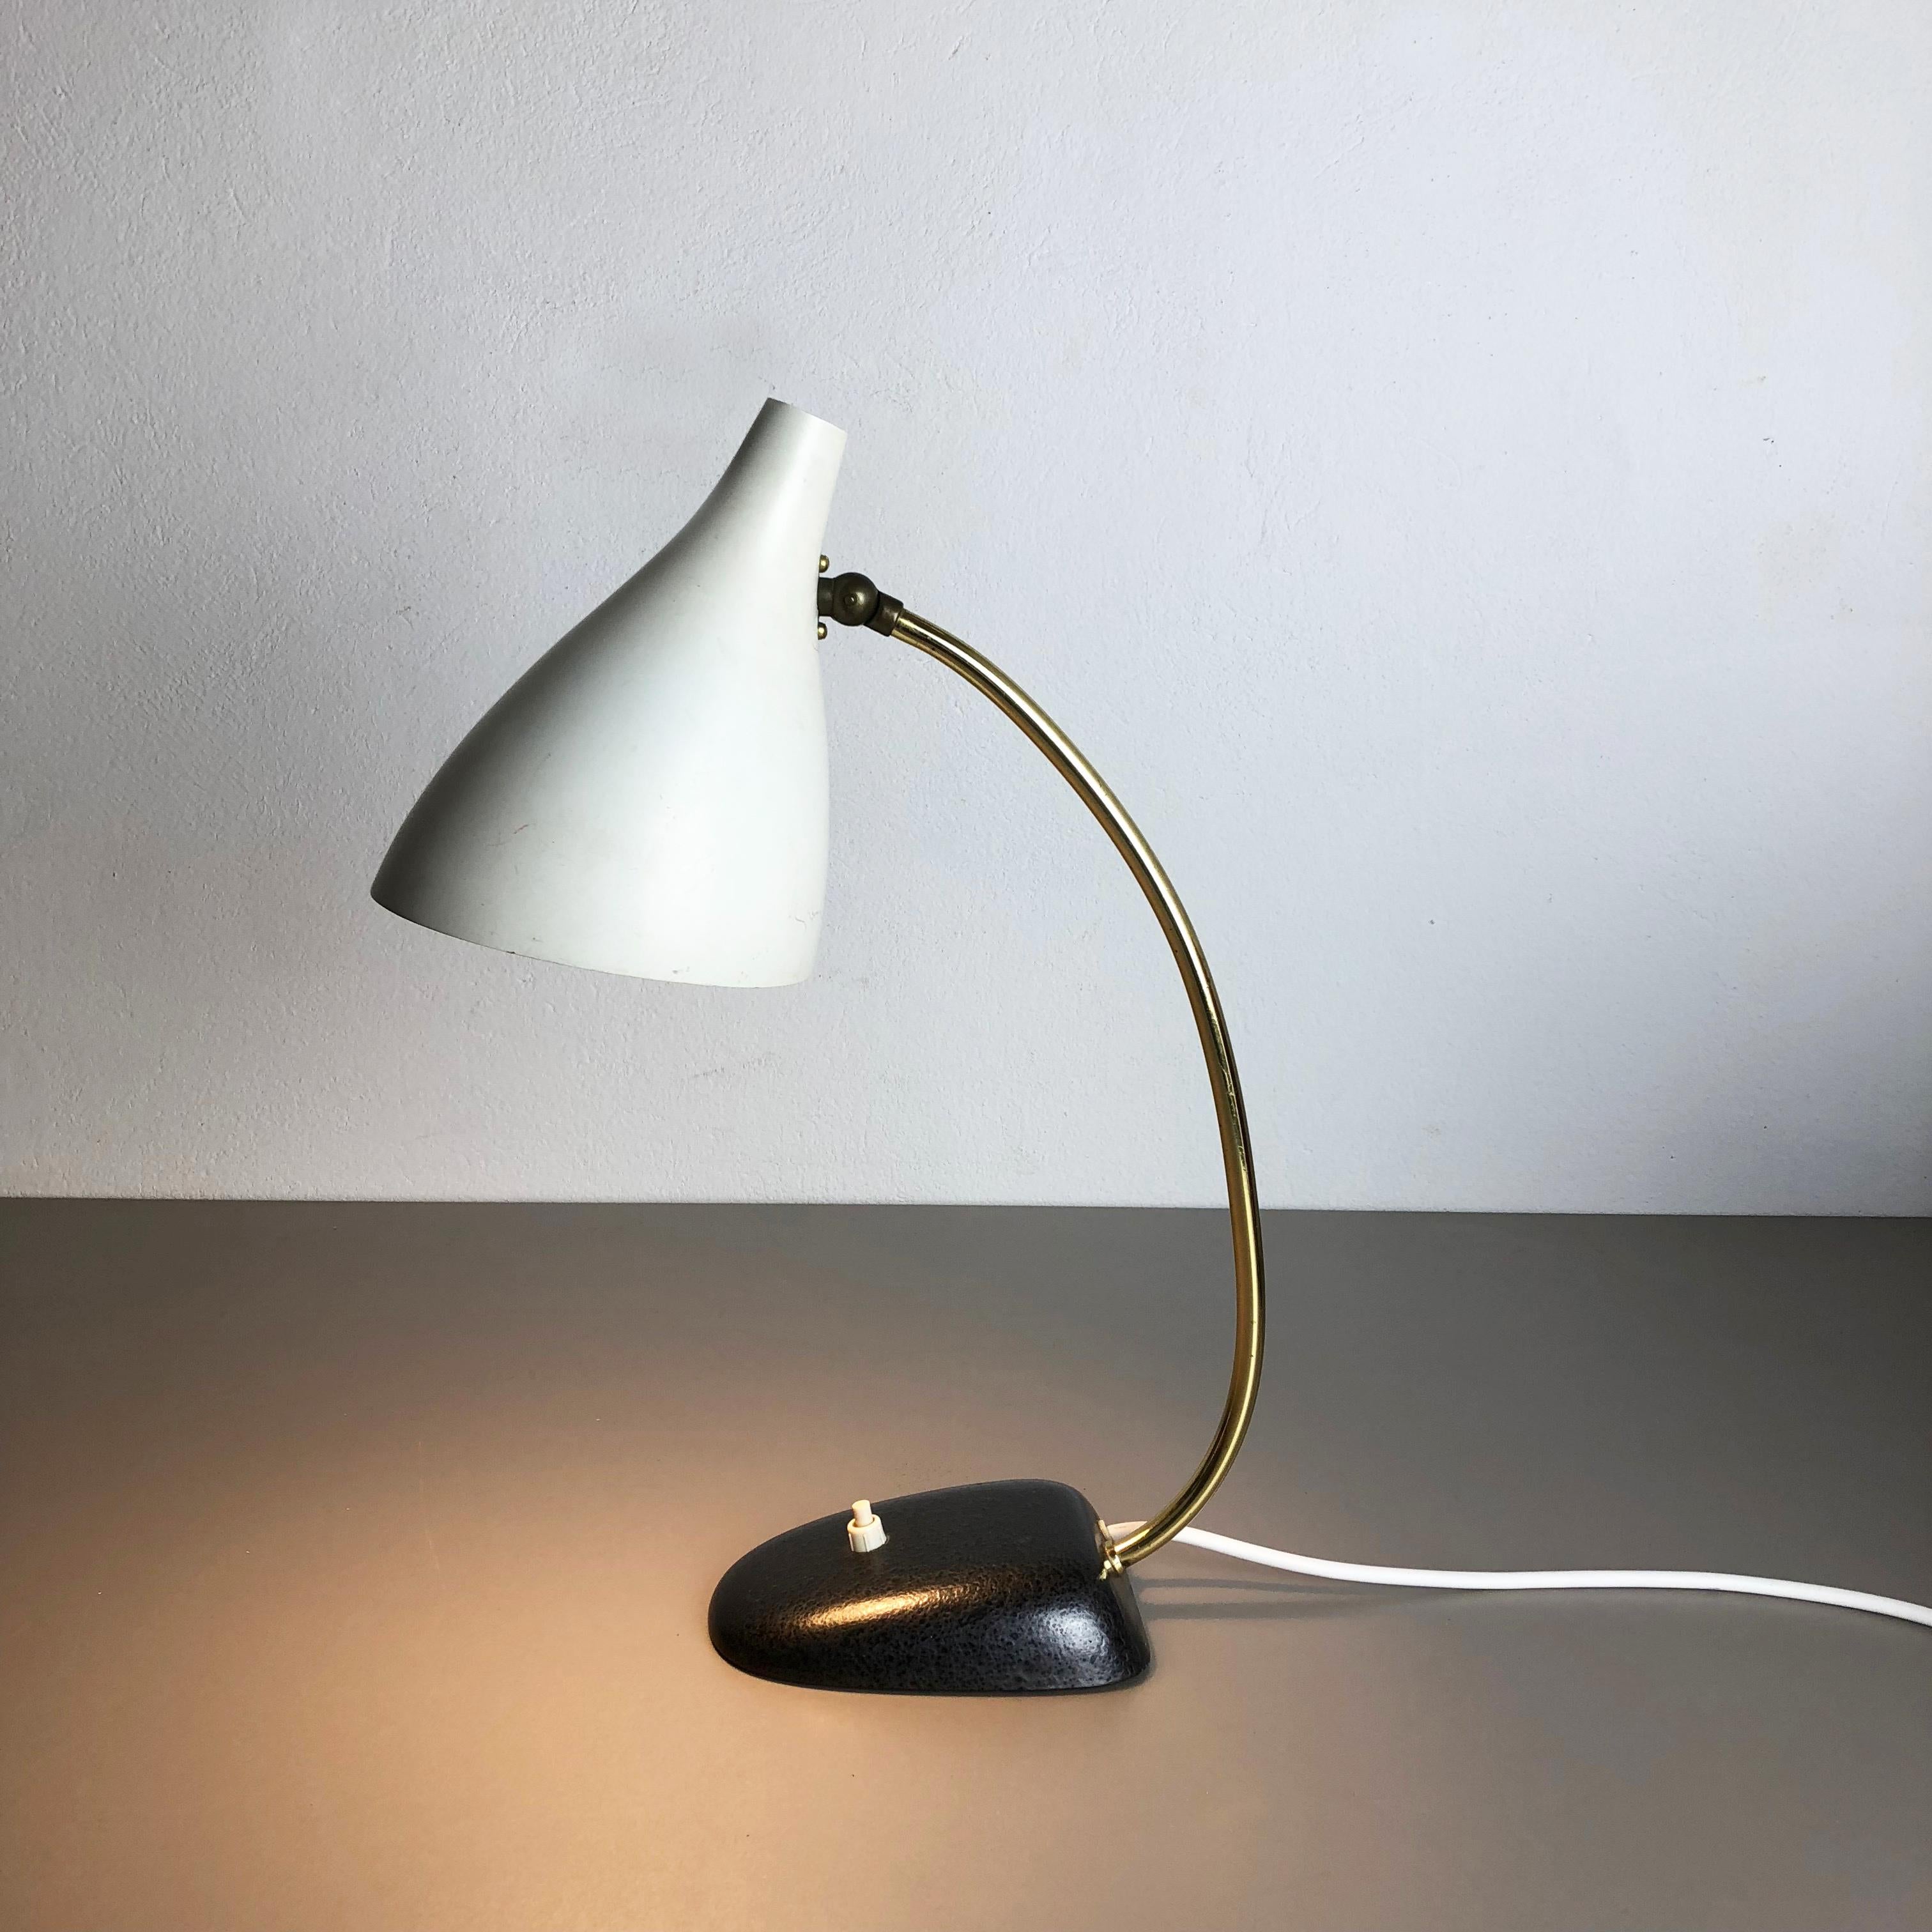 Mid-Century Modern original modernist 1960s metal Table light made by Cosack, Germany